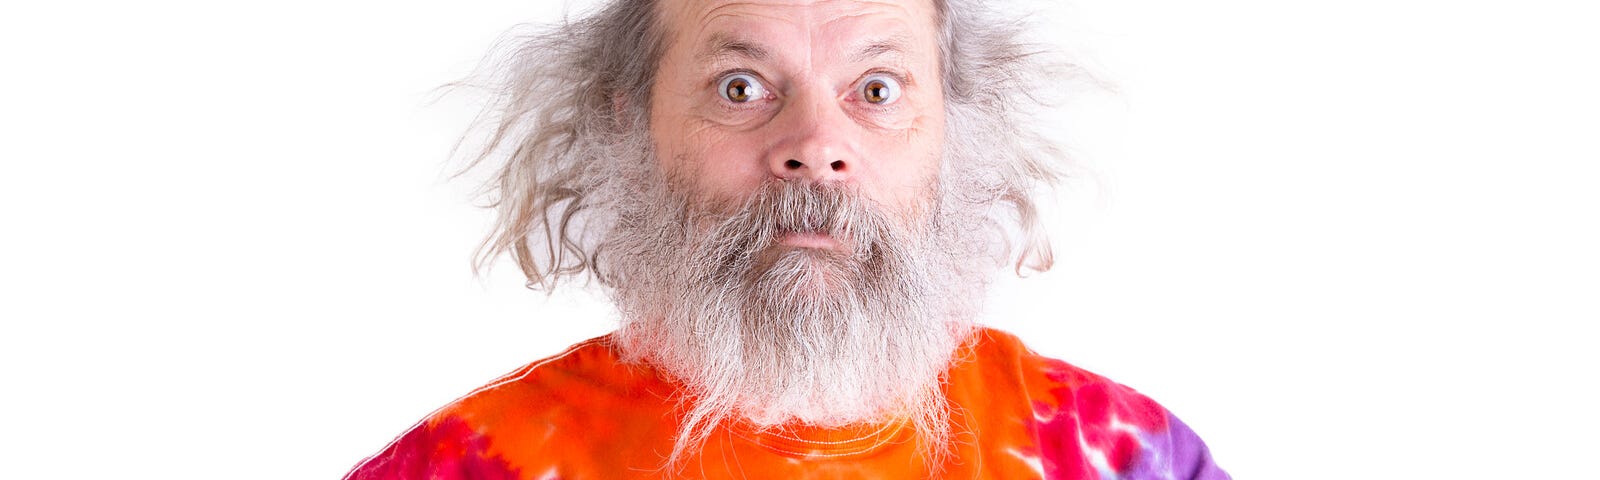 Senior man with grey hair and beard so surprised he’s wide-eyed, he is wearing a tie dye colorful t-shirt